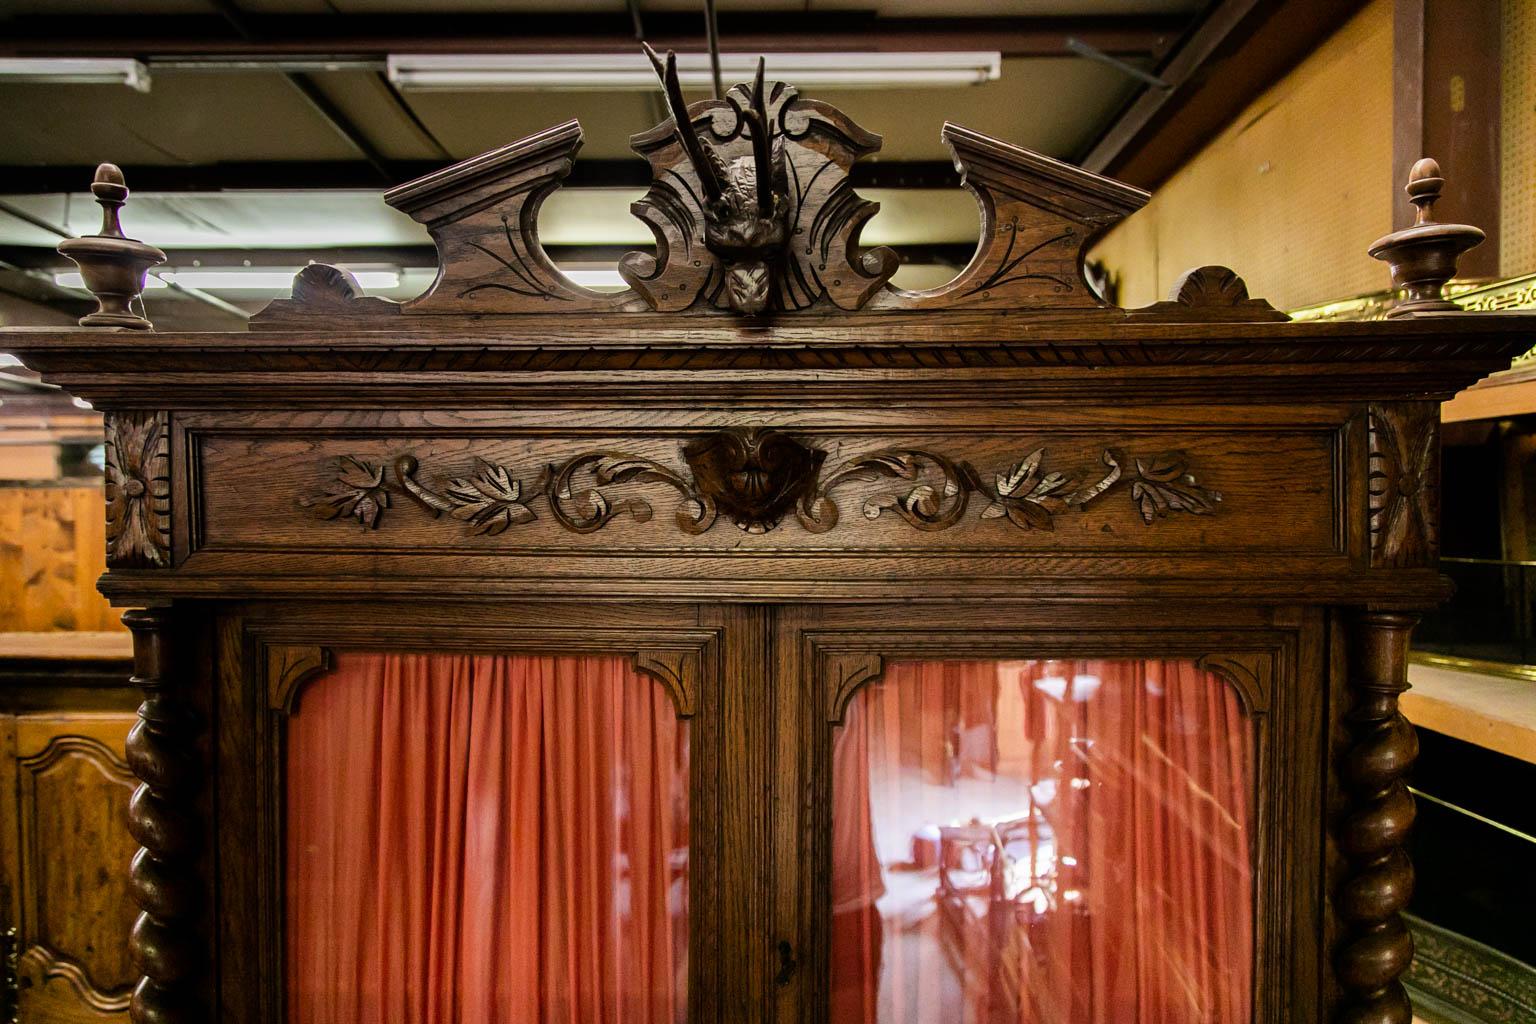 The cornice of this oak cupboard has a carved stag head with leaf carvings in a central cartouche in the frieze. The side stiles in the upper and lower halves are barley twist. The upper case is supported by stylized winged lions. The drawer handles